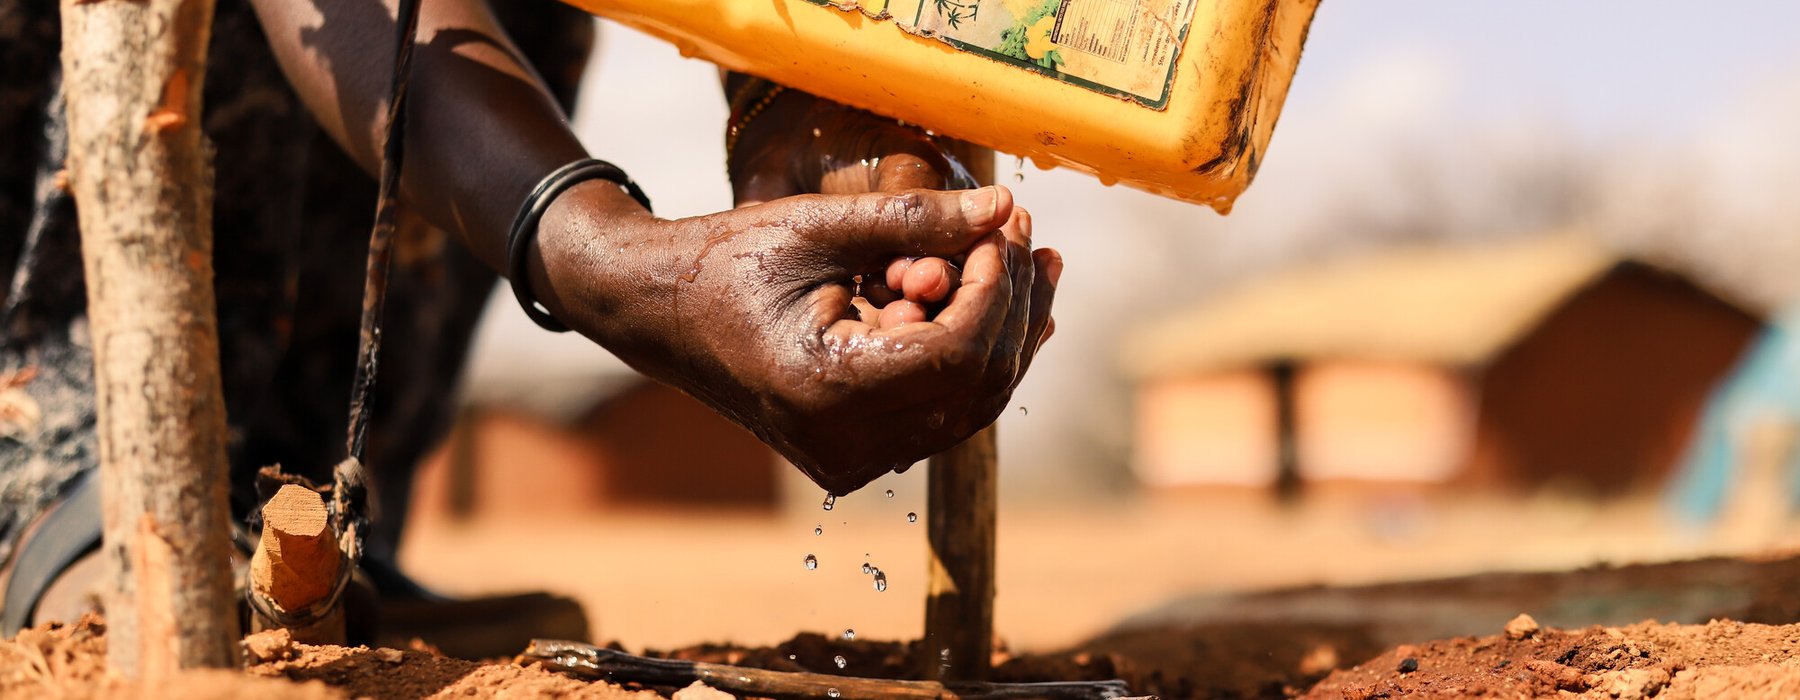 A close up of hands with water on them from a yellow jerry can above them.